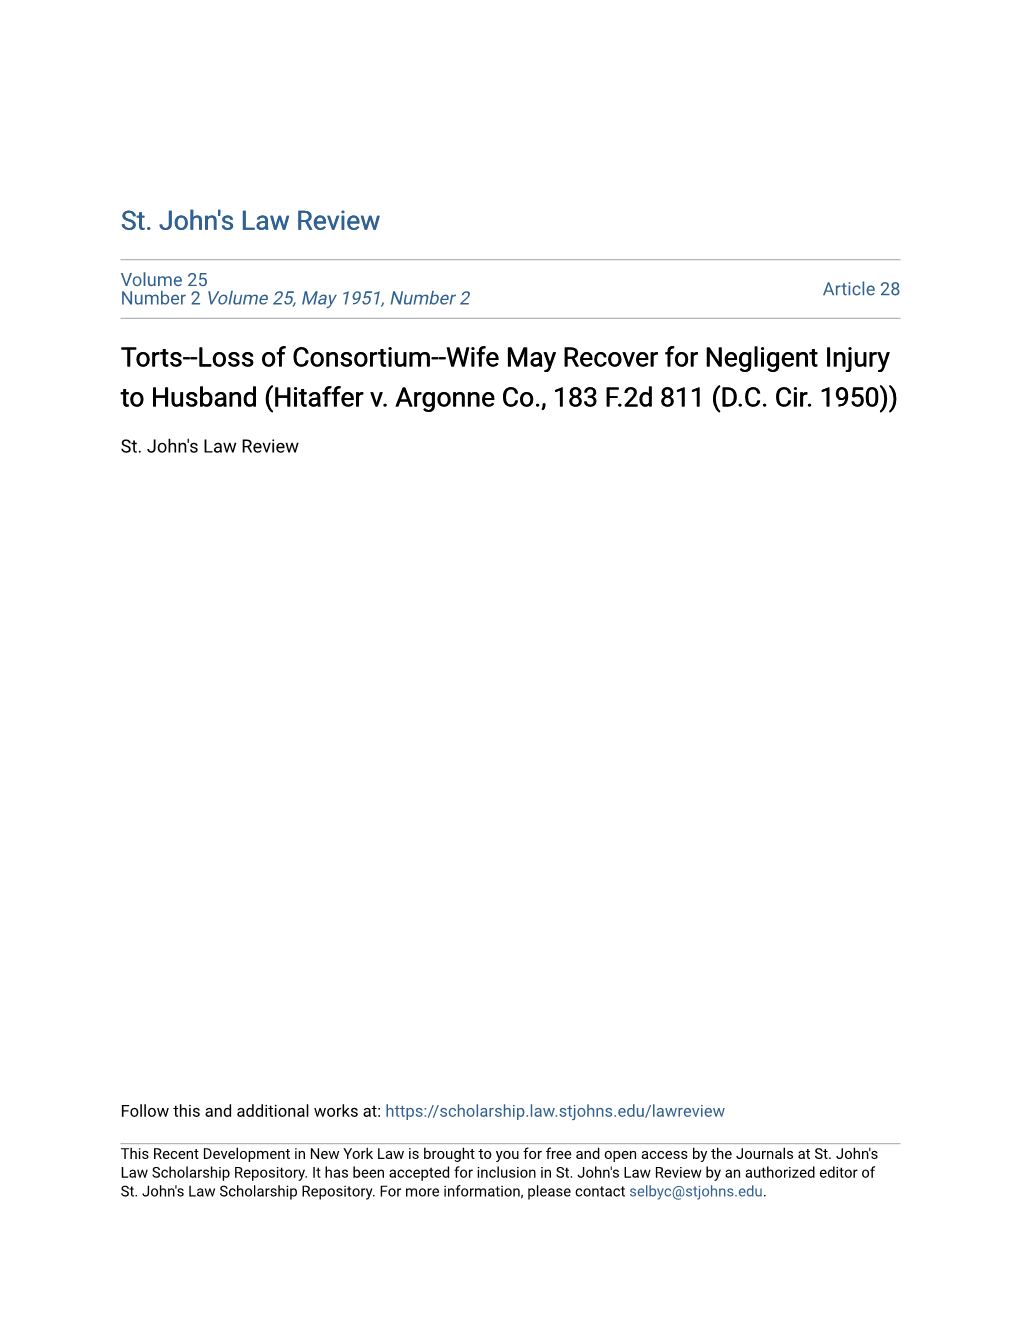 Torts--Loss of Consortium--Wife May Recover for Negligent Injury to Husband (Hitaffer V